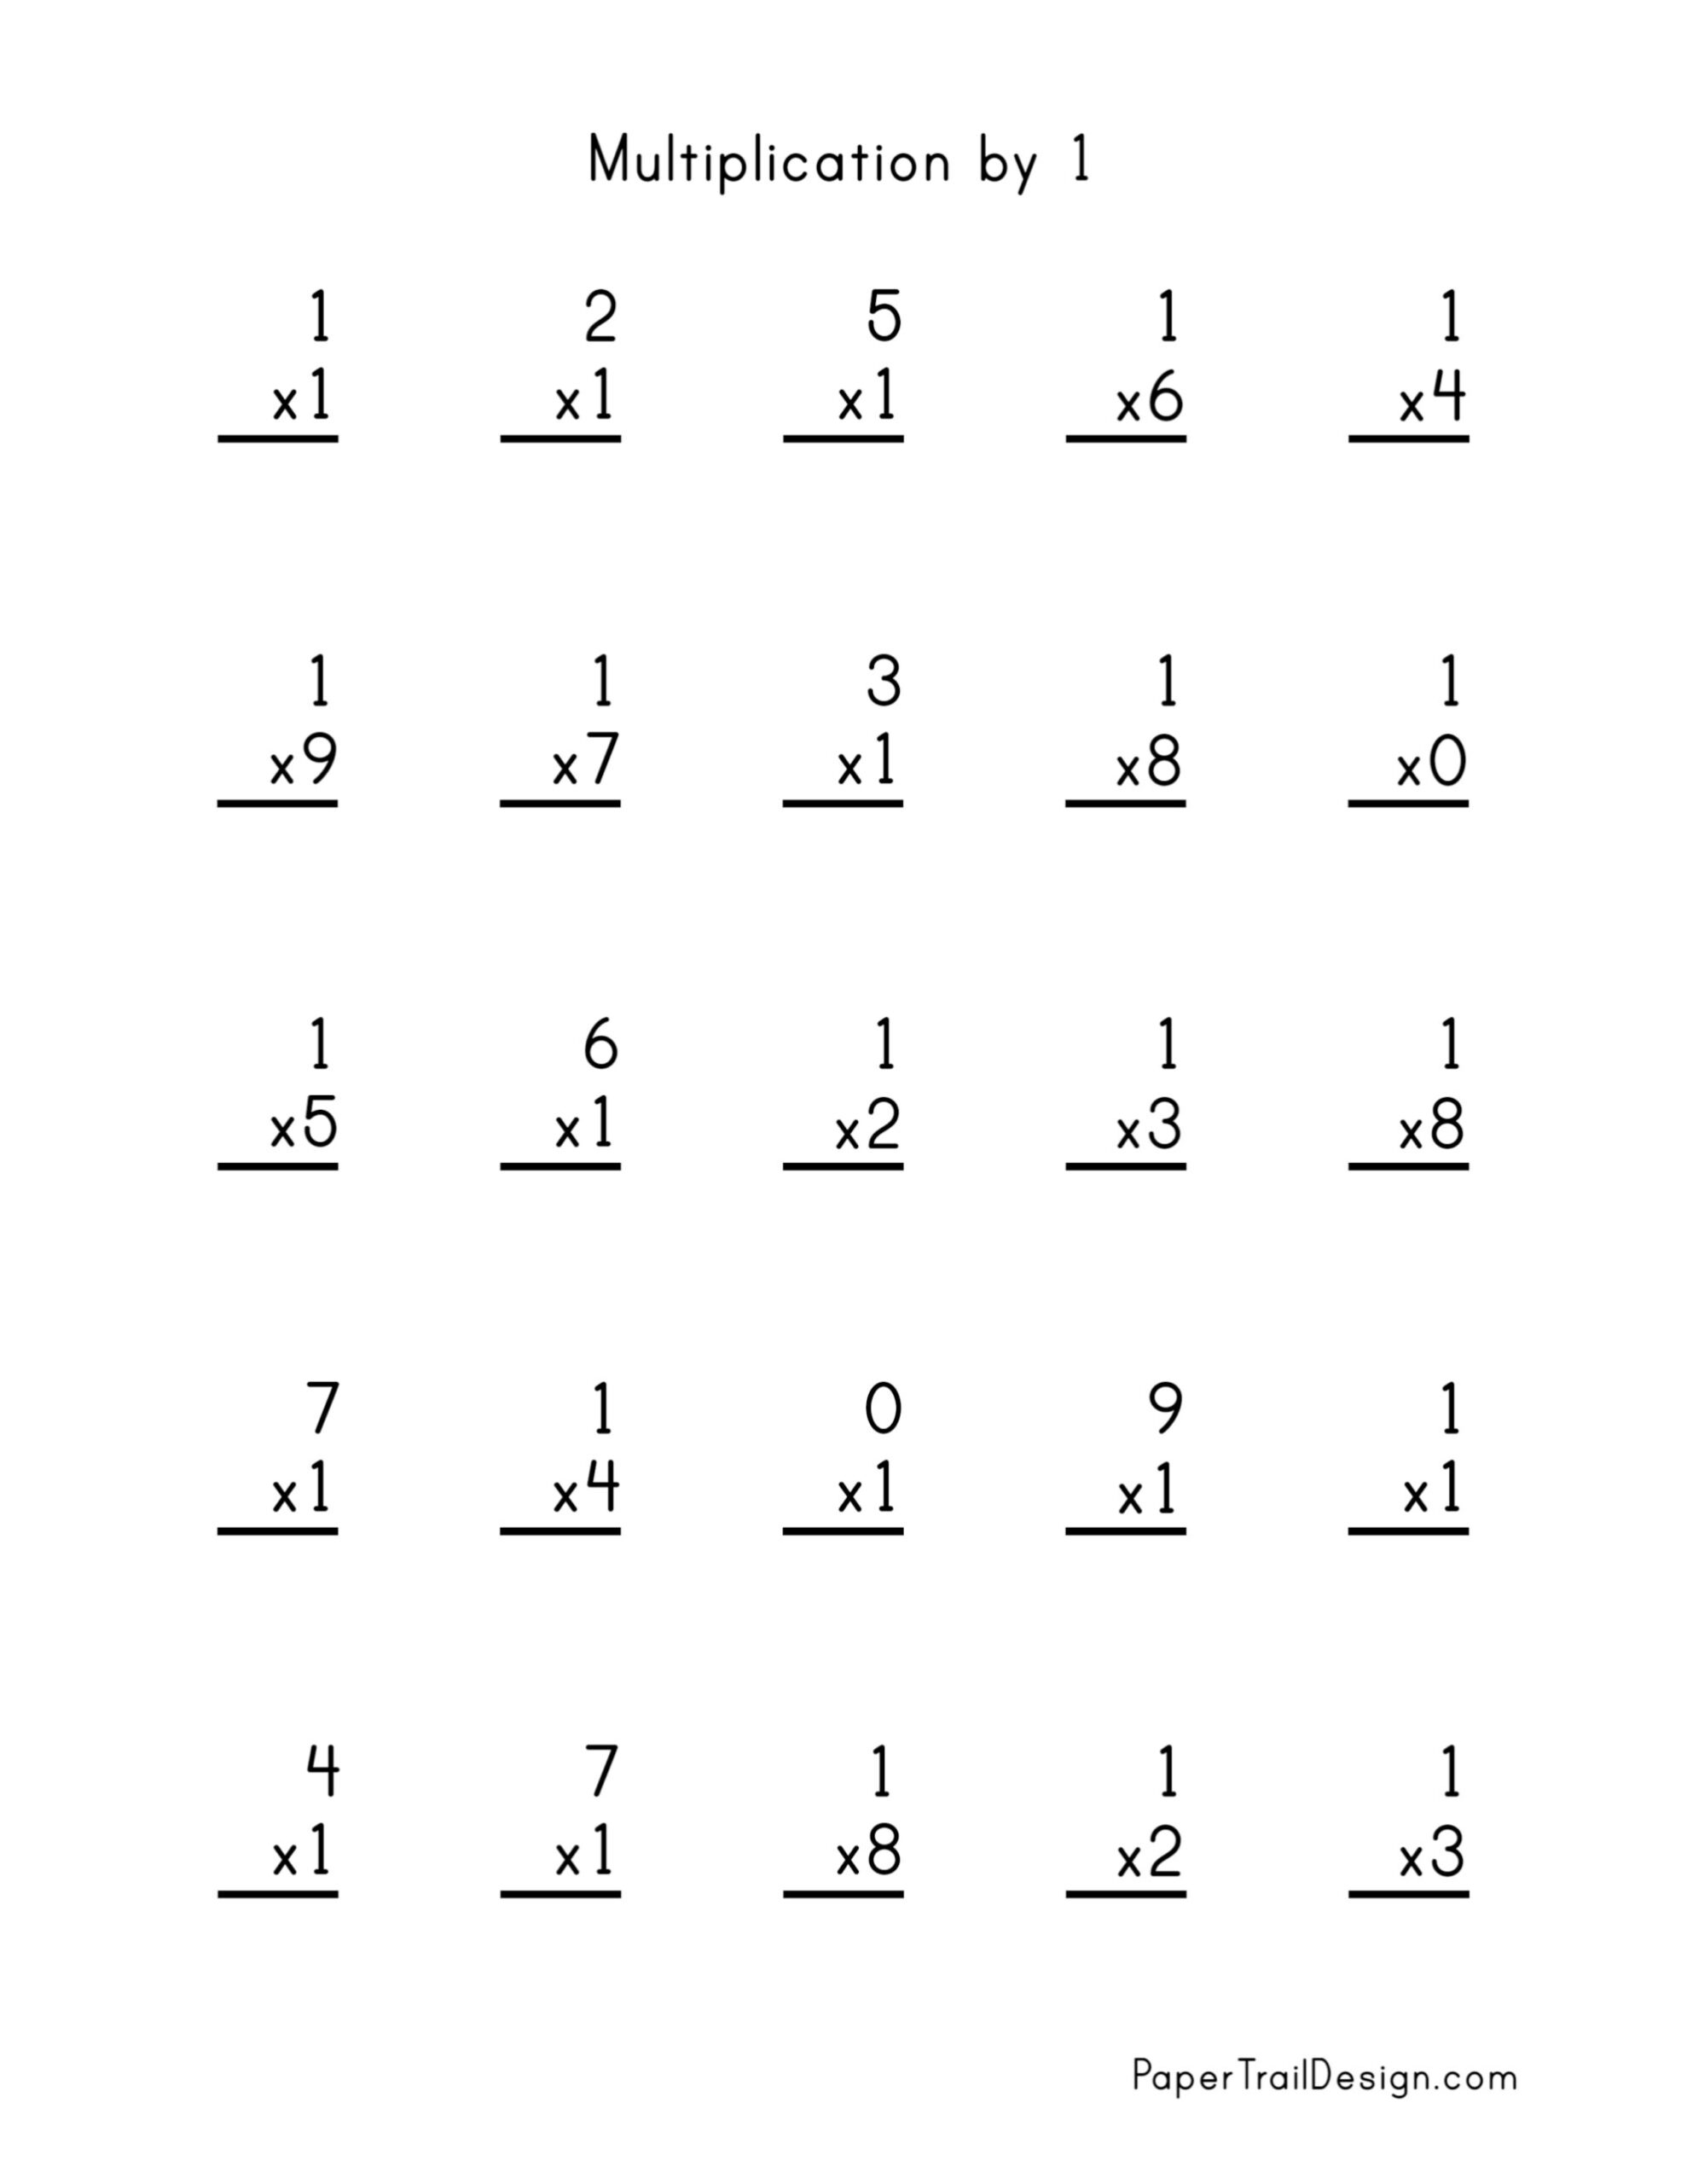 Multiplication Facts Timed Test Printable